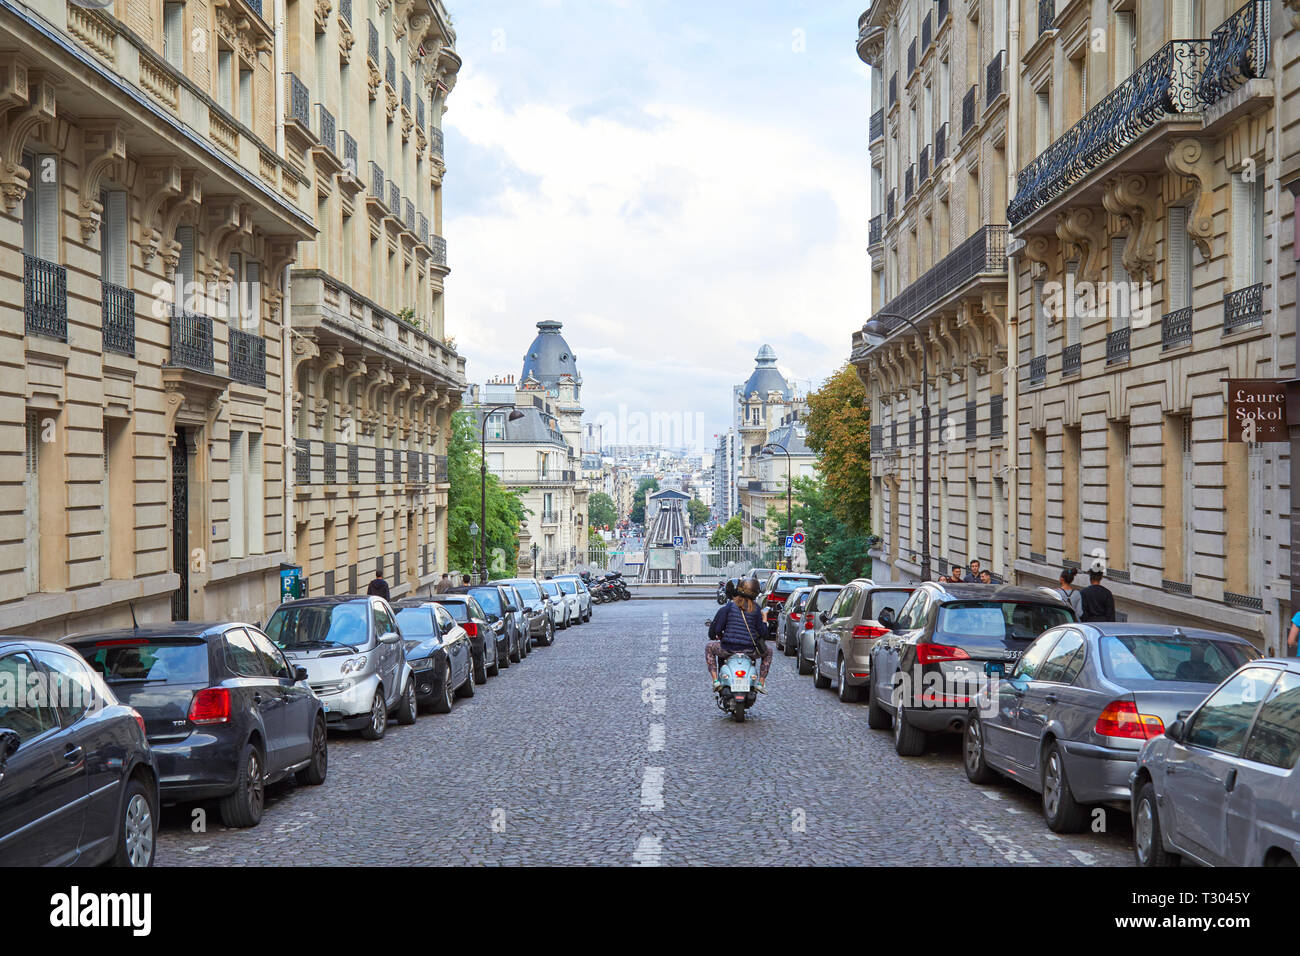 PARIS, FRANCE - JULY 22, 2017: Street in Paris with perspective, man and woman riding moped in France Stock Photo